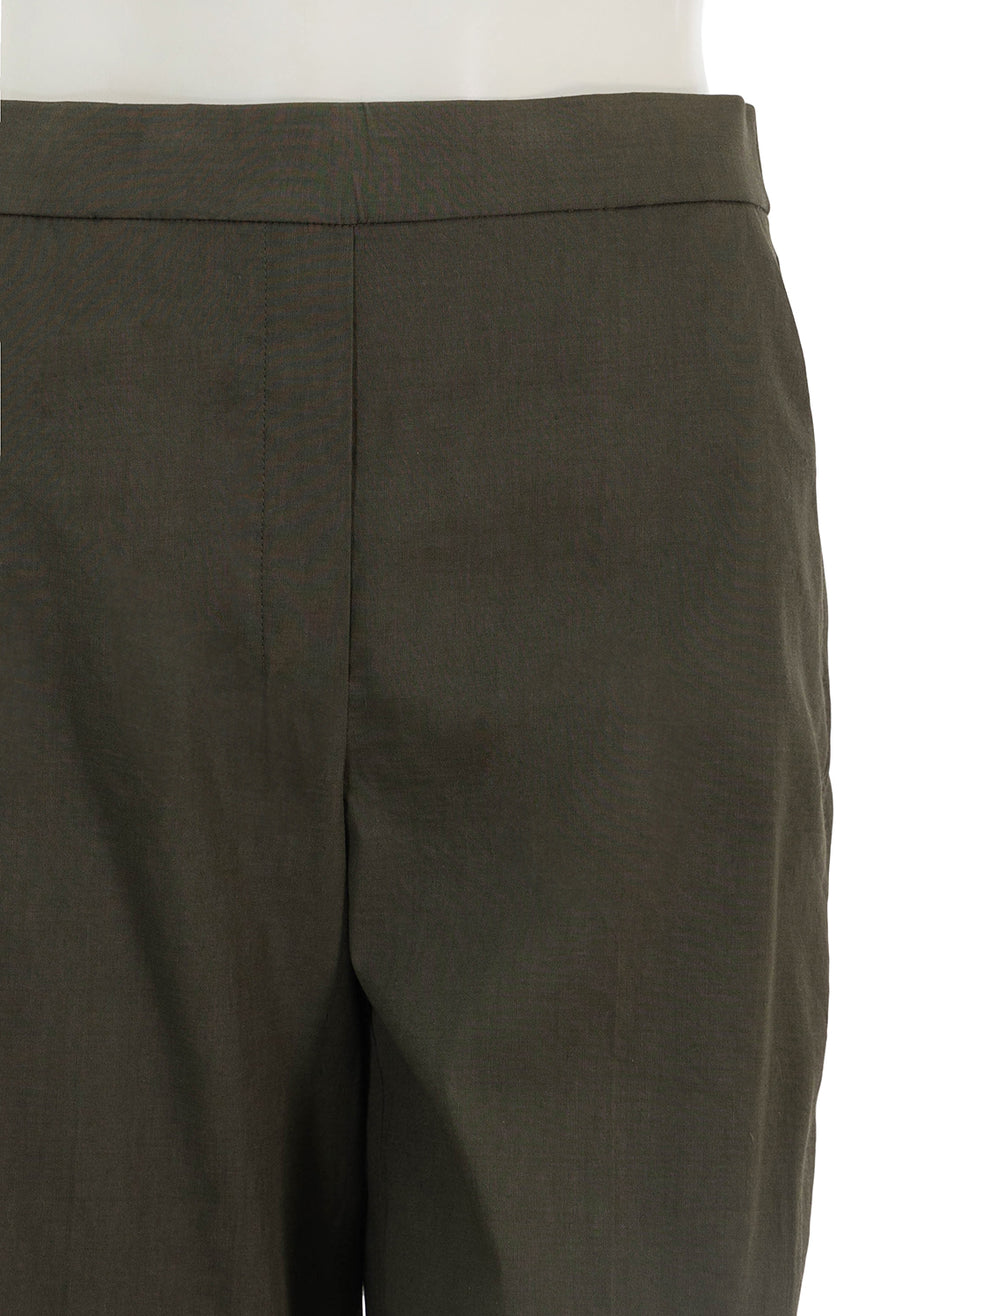 Close-up view of Theory's Relaxed Straight Cropped Pull-On Trouser in Olive.